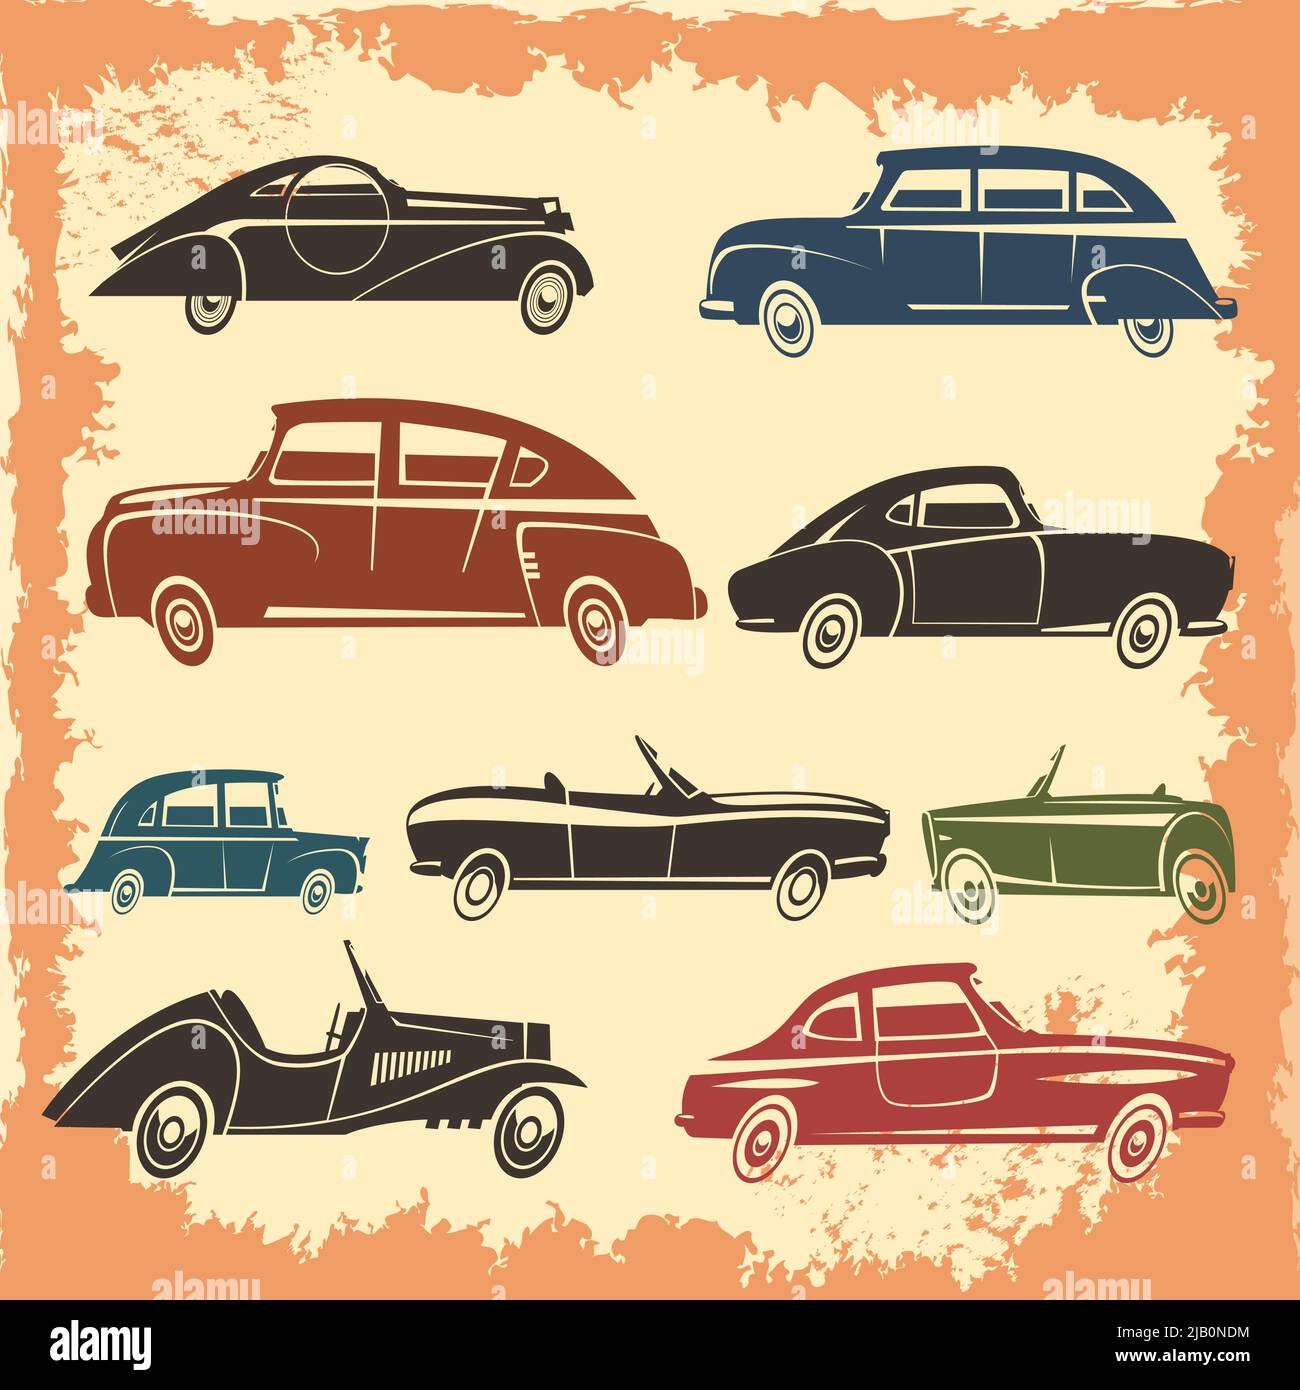 Retro car models collection with vintage style autos on aged background abstract vector illustration Stock Vector